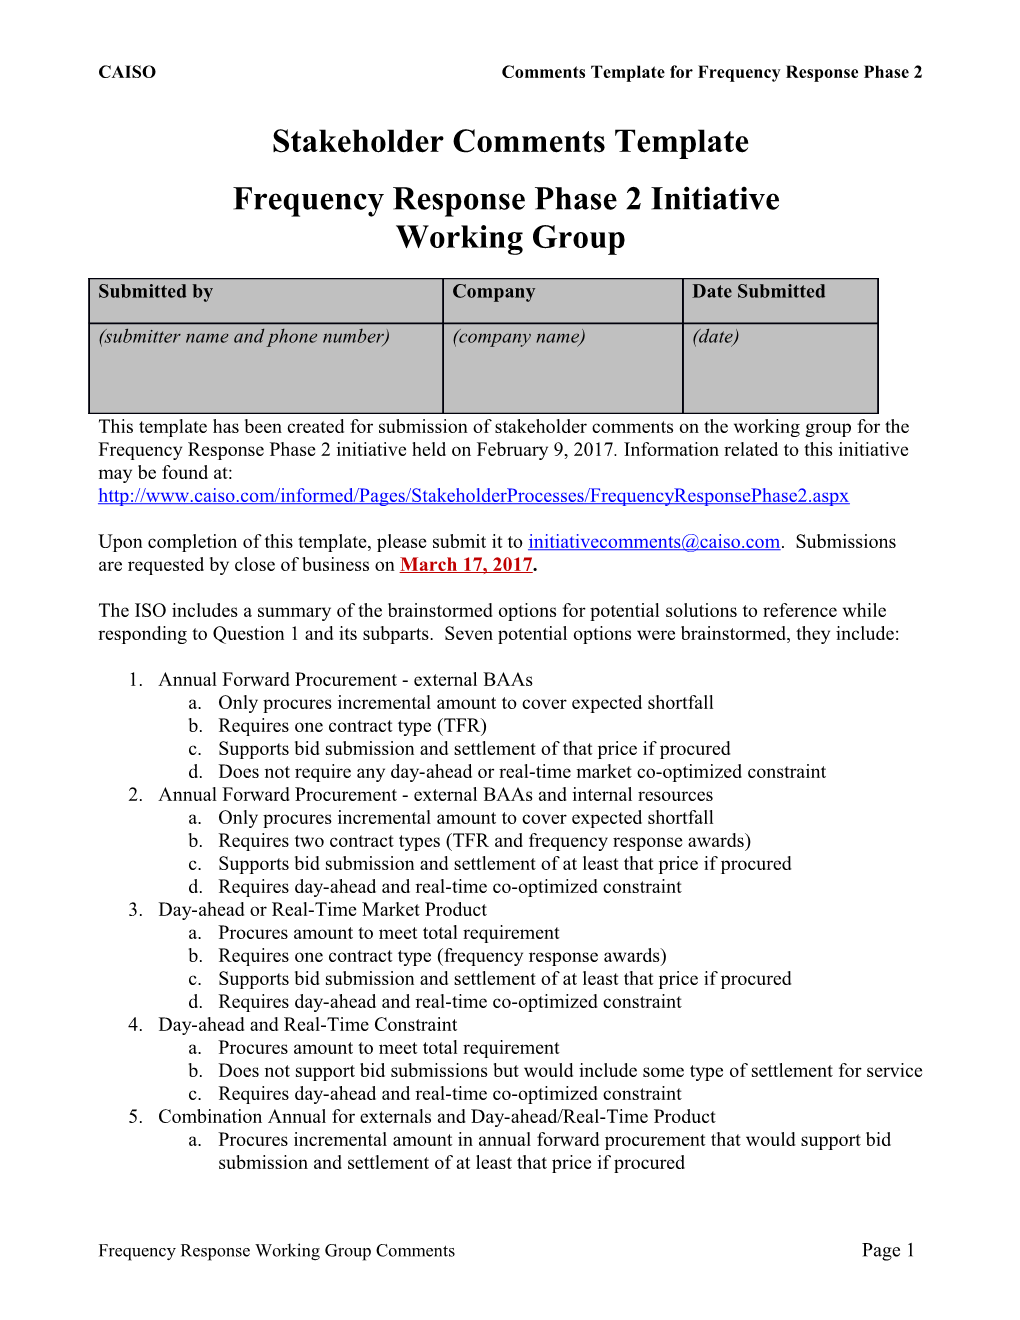 Comments Template - Frequency Response Phase 2 Working Group - Feb 9, 2017